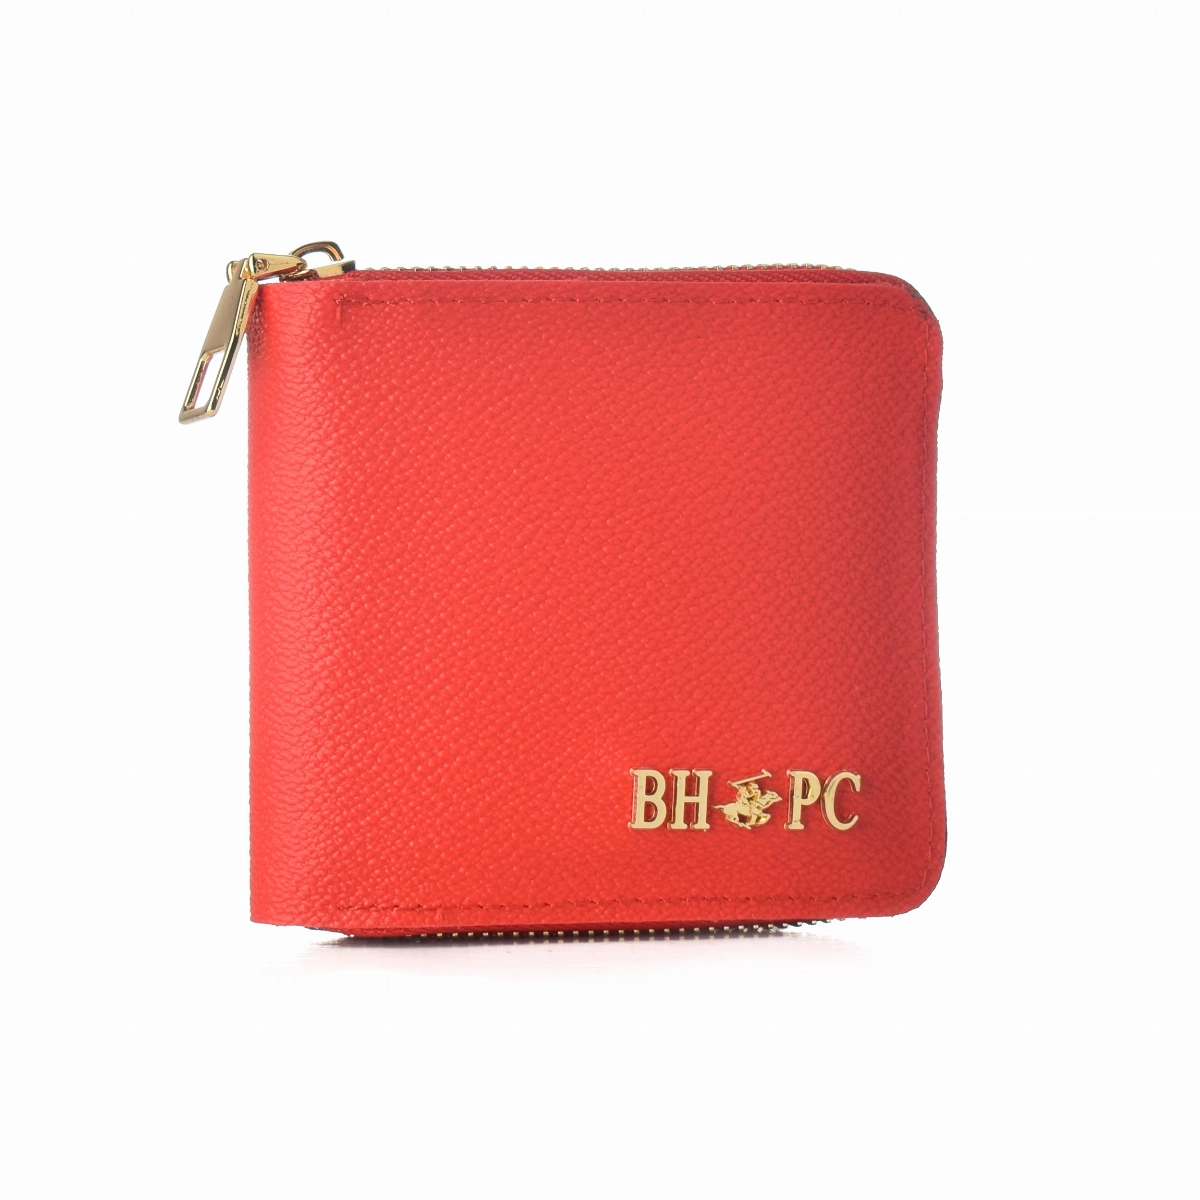 CARTERA BEVERLY HILLS POLO CLUB 1506-RED 1506RED